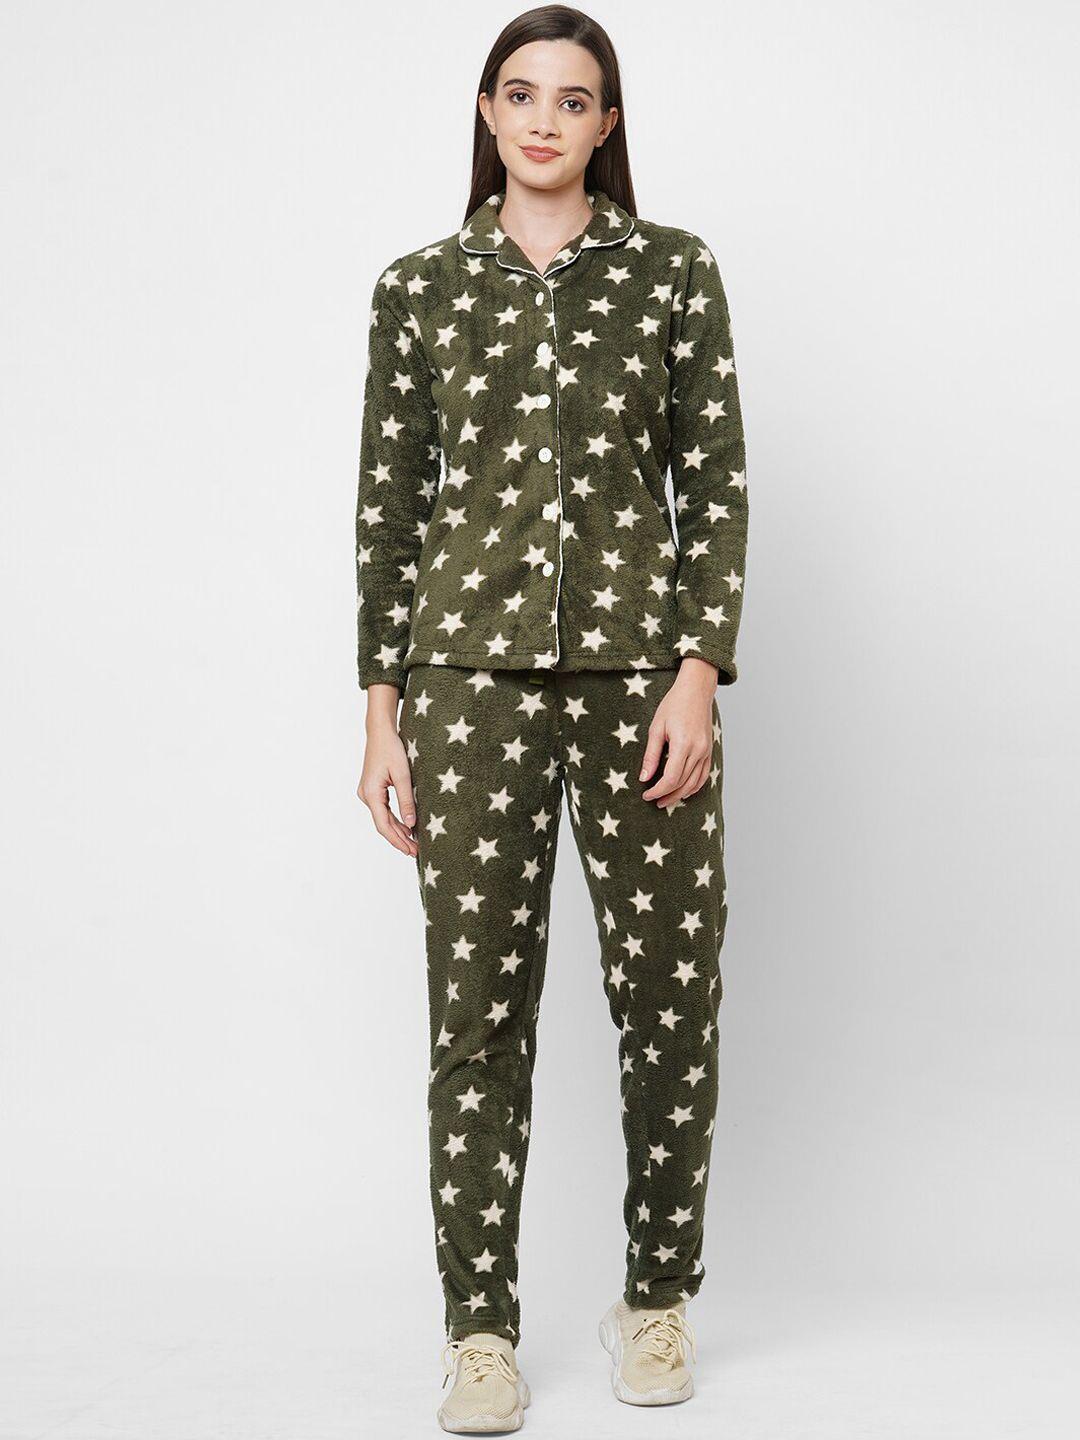 sweet dreams set of 2 women olive green & white printed night suit